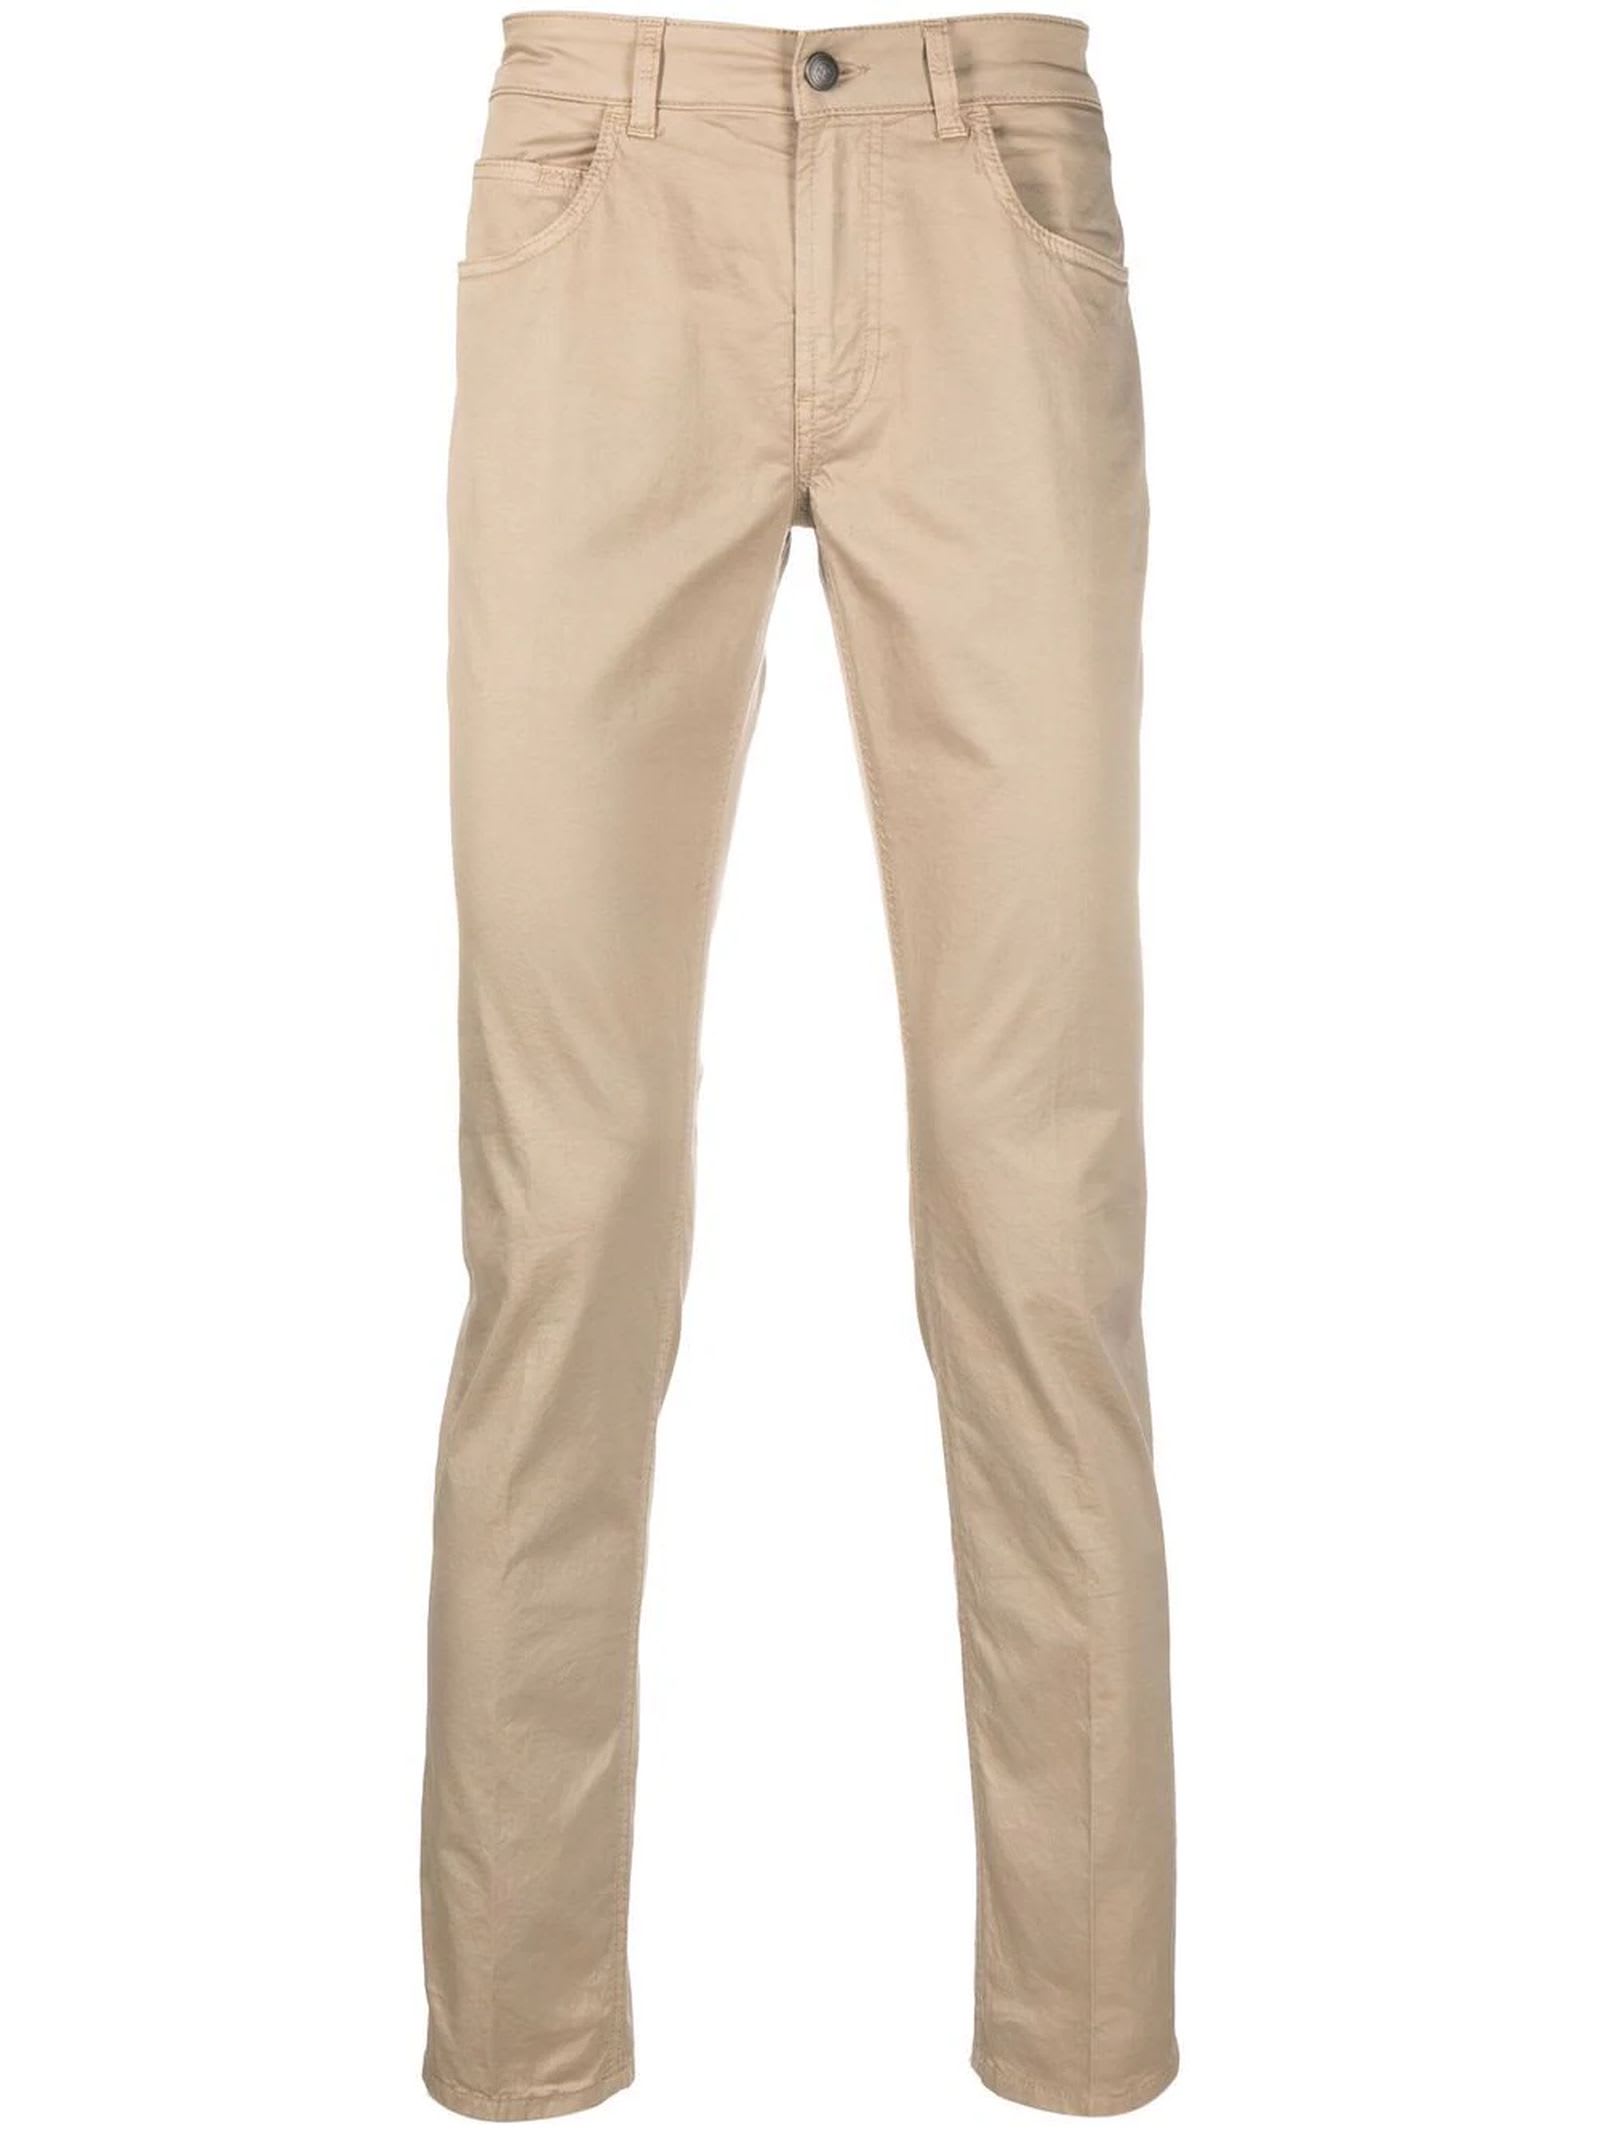 Fay Beige Cotton Blend Trousers